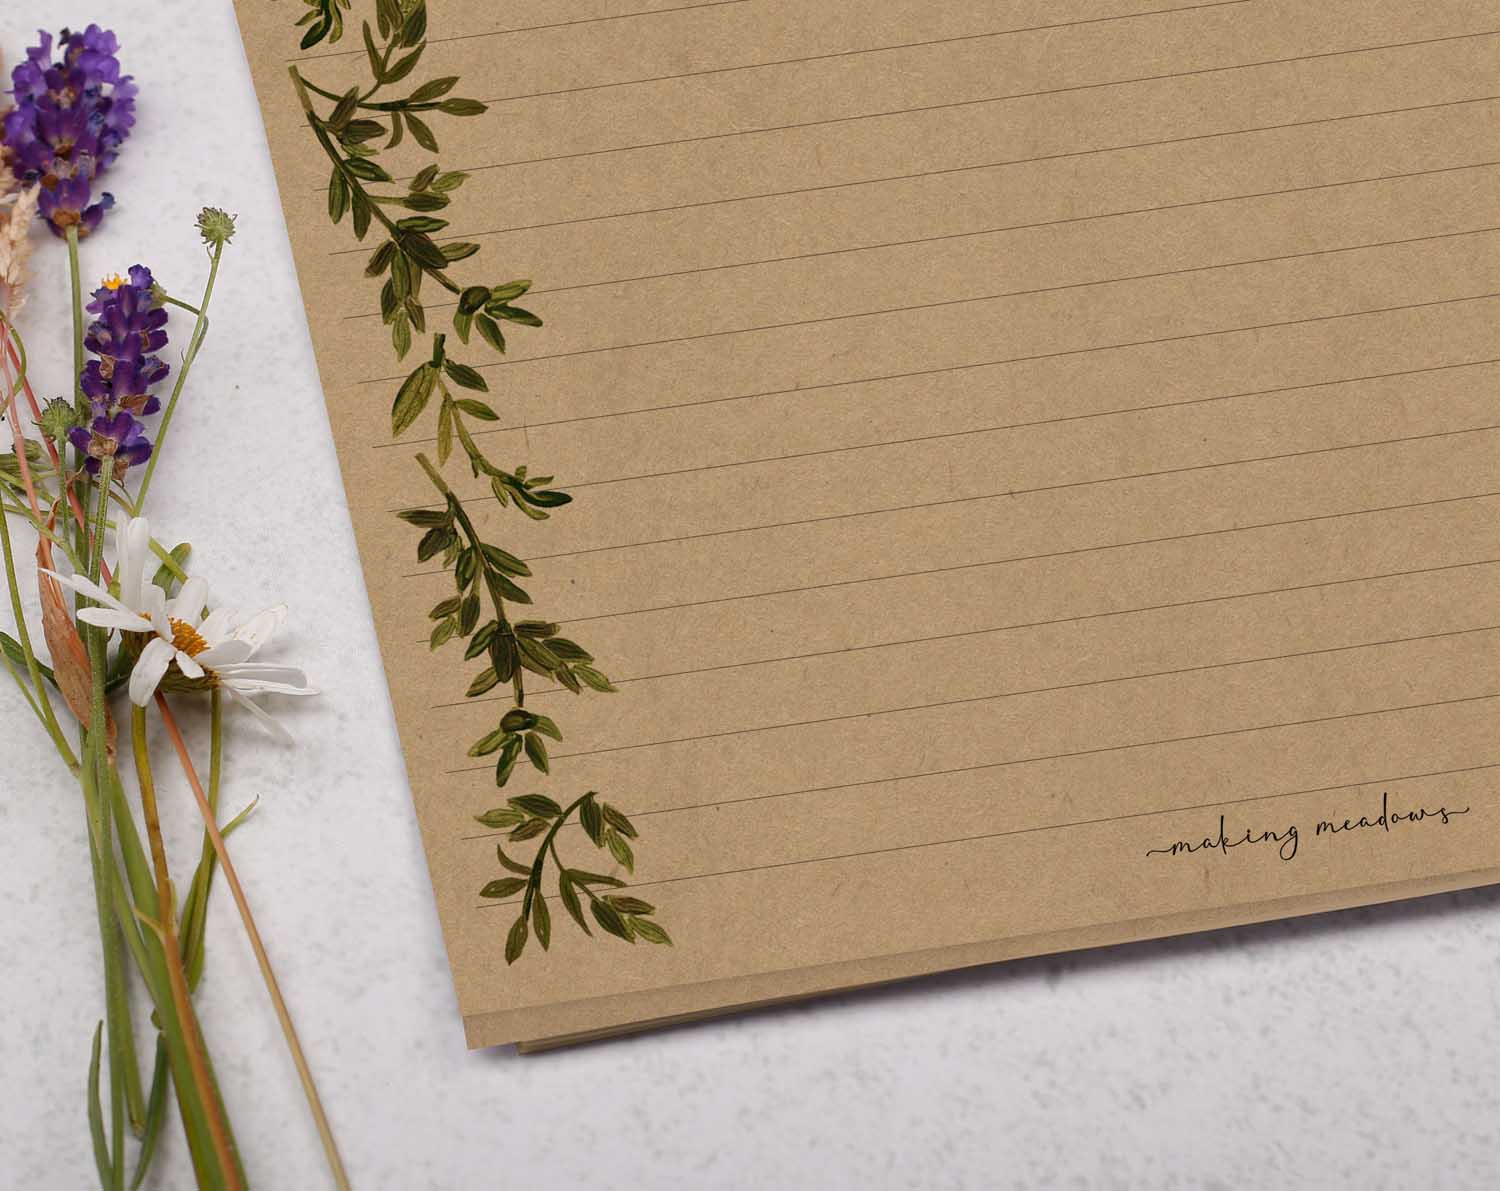 A4 Kraft Letter Writing Paper Sheets with a Green Watercolour Botanical Leaf Border design.